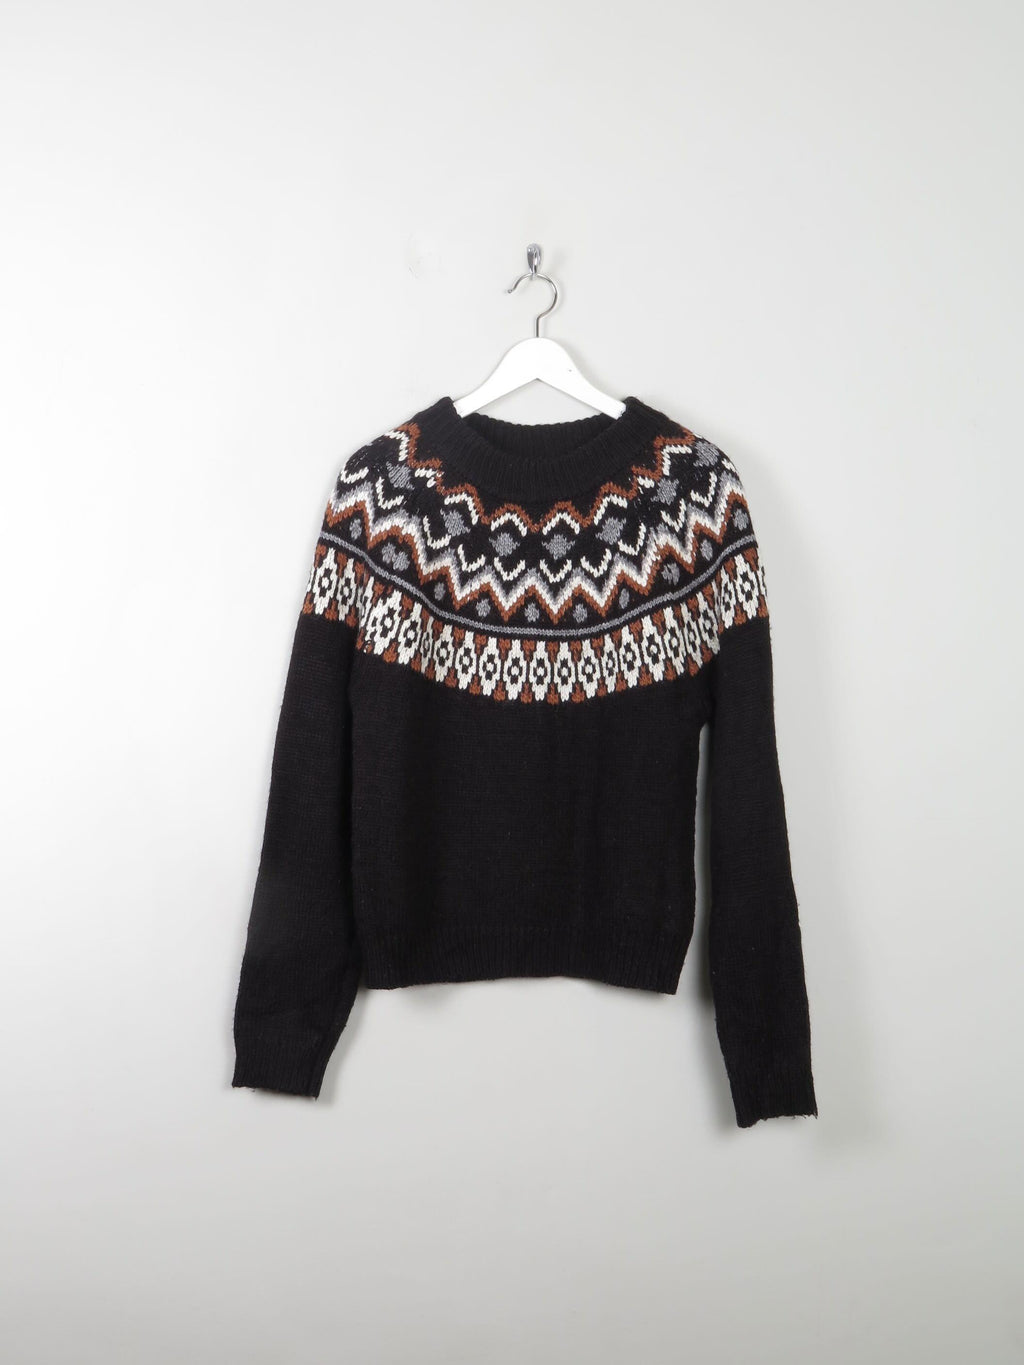 Women's Nordic Style Wool Jumper S/M - The Harlequin